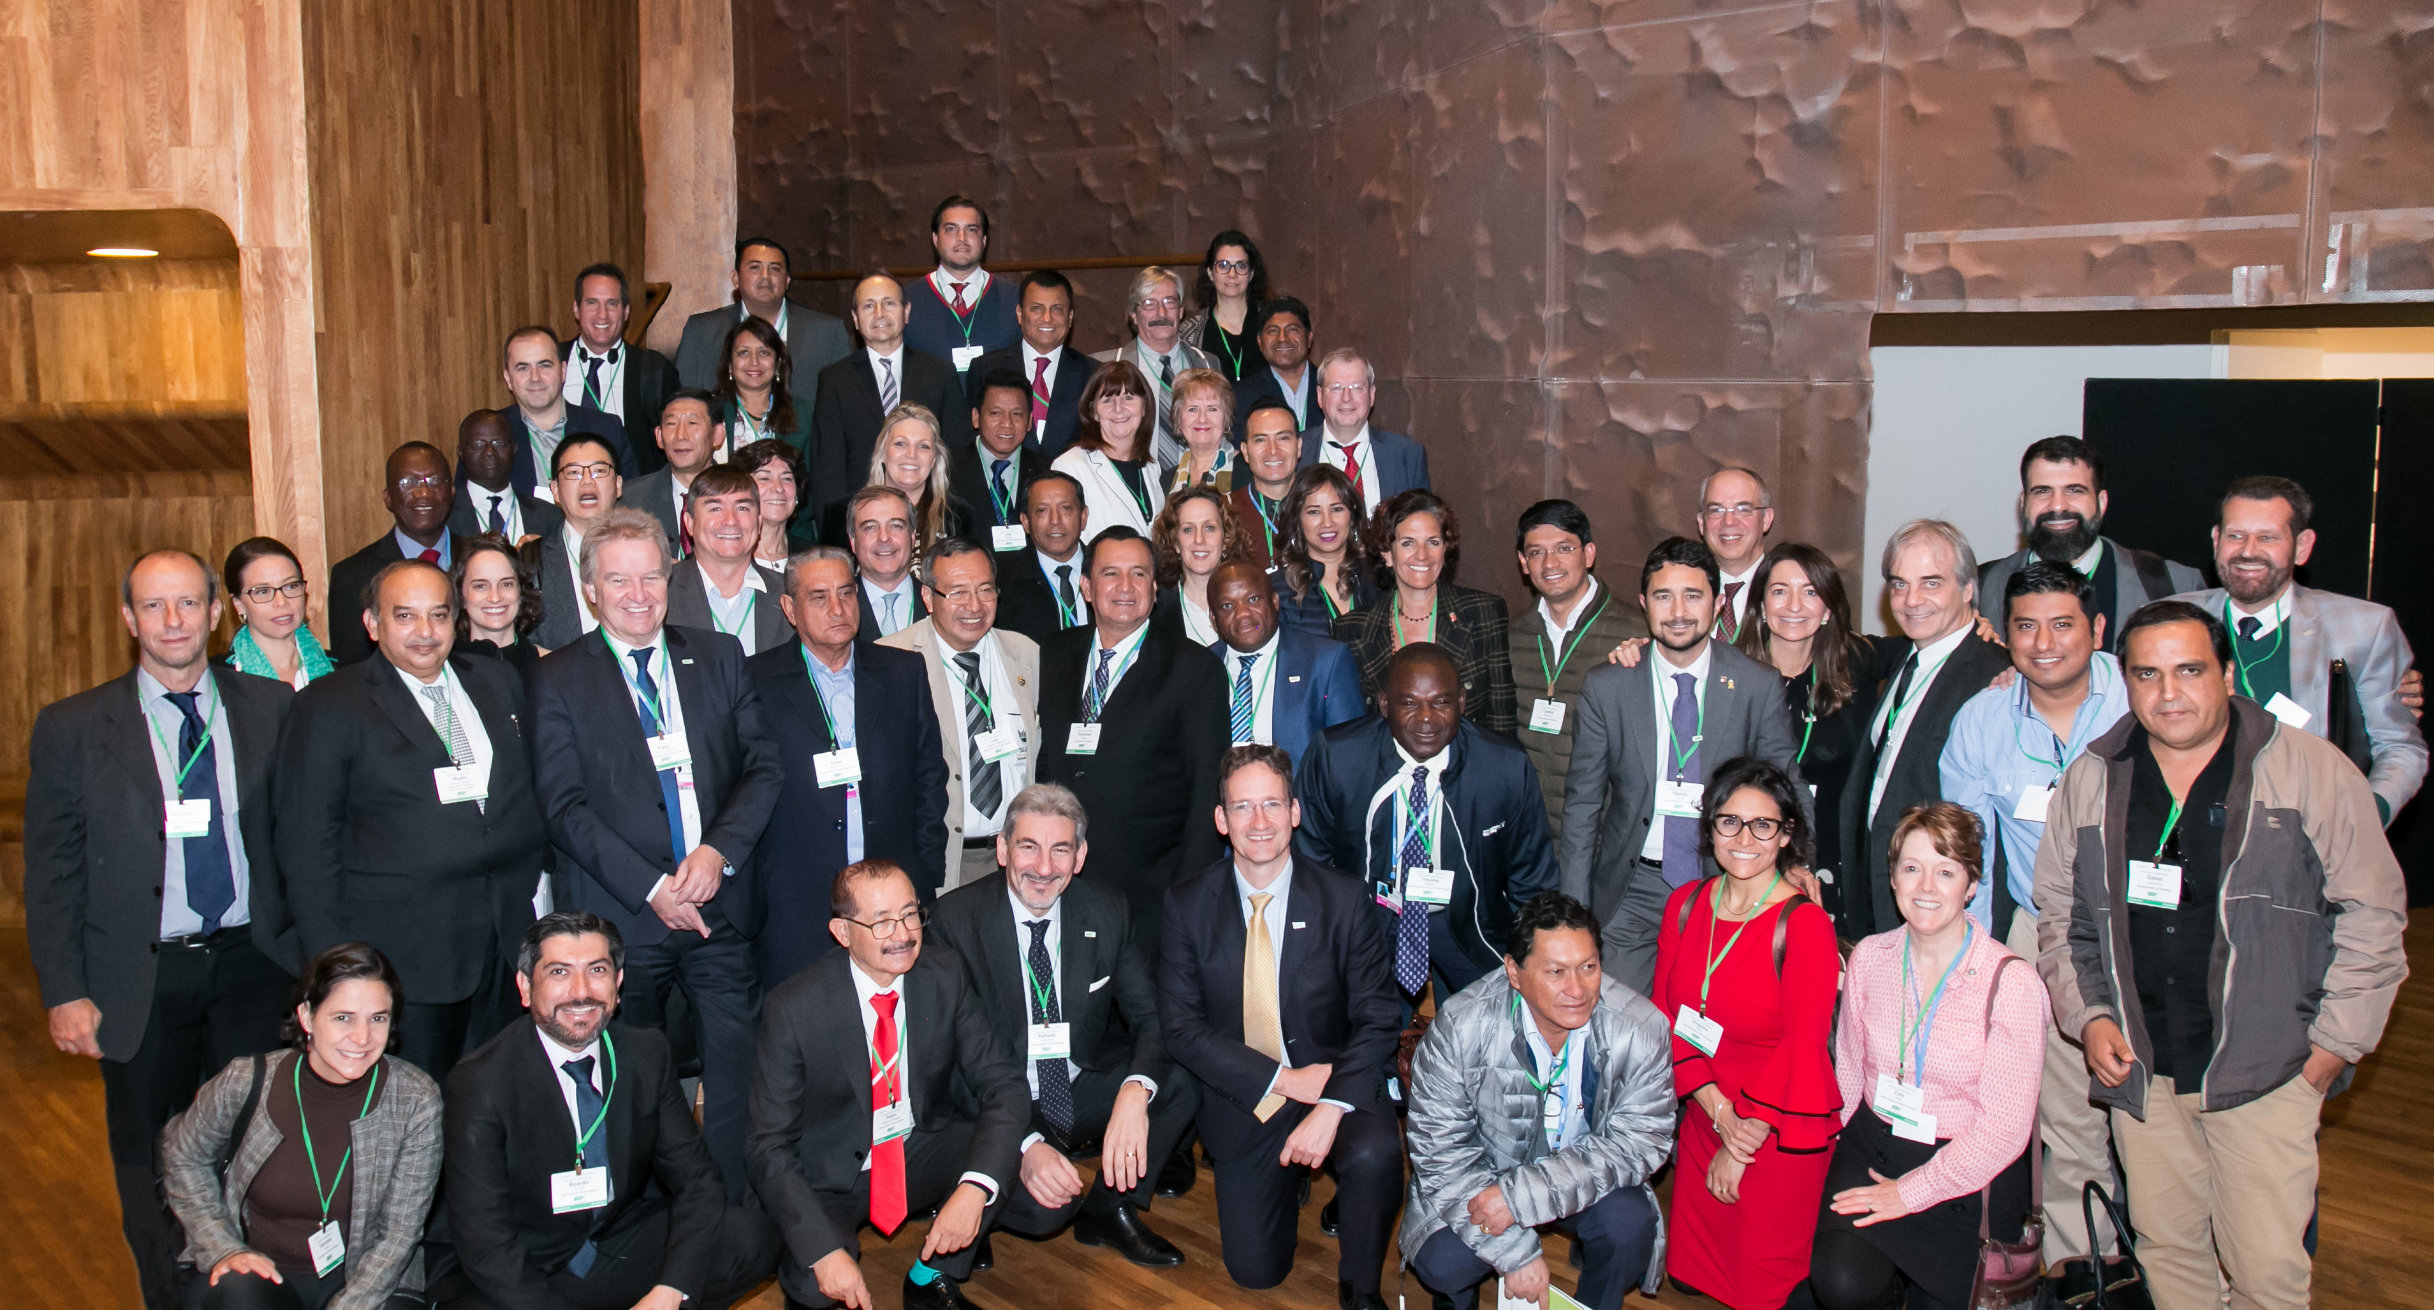 Participants in the General Assembly of the Under2 Coalition on the sidelines of COP25 in Madrid']